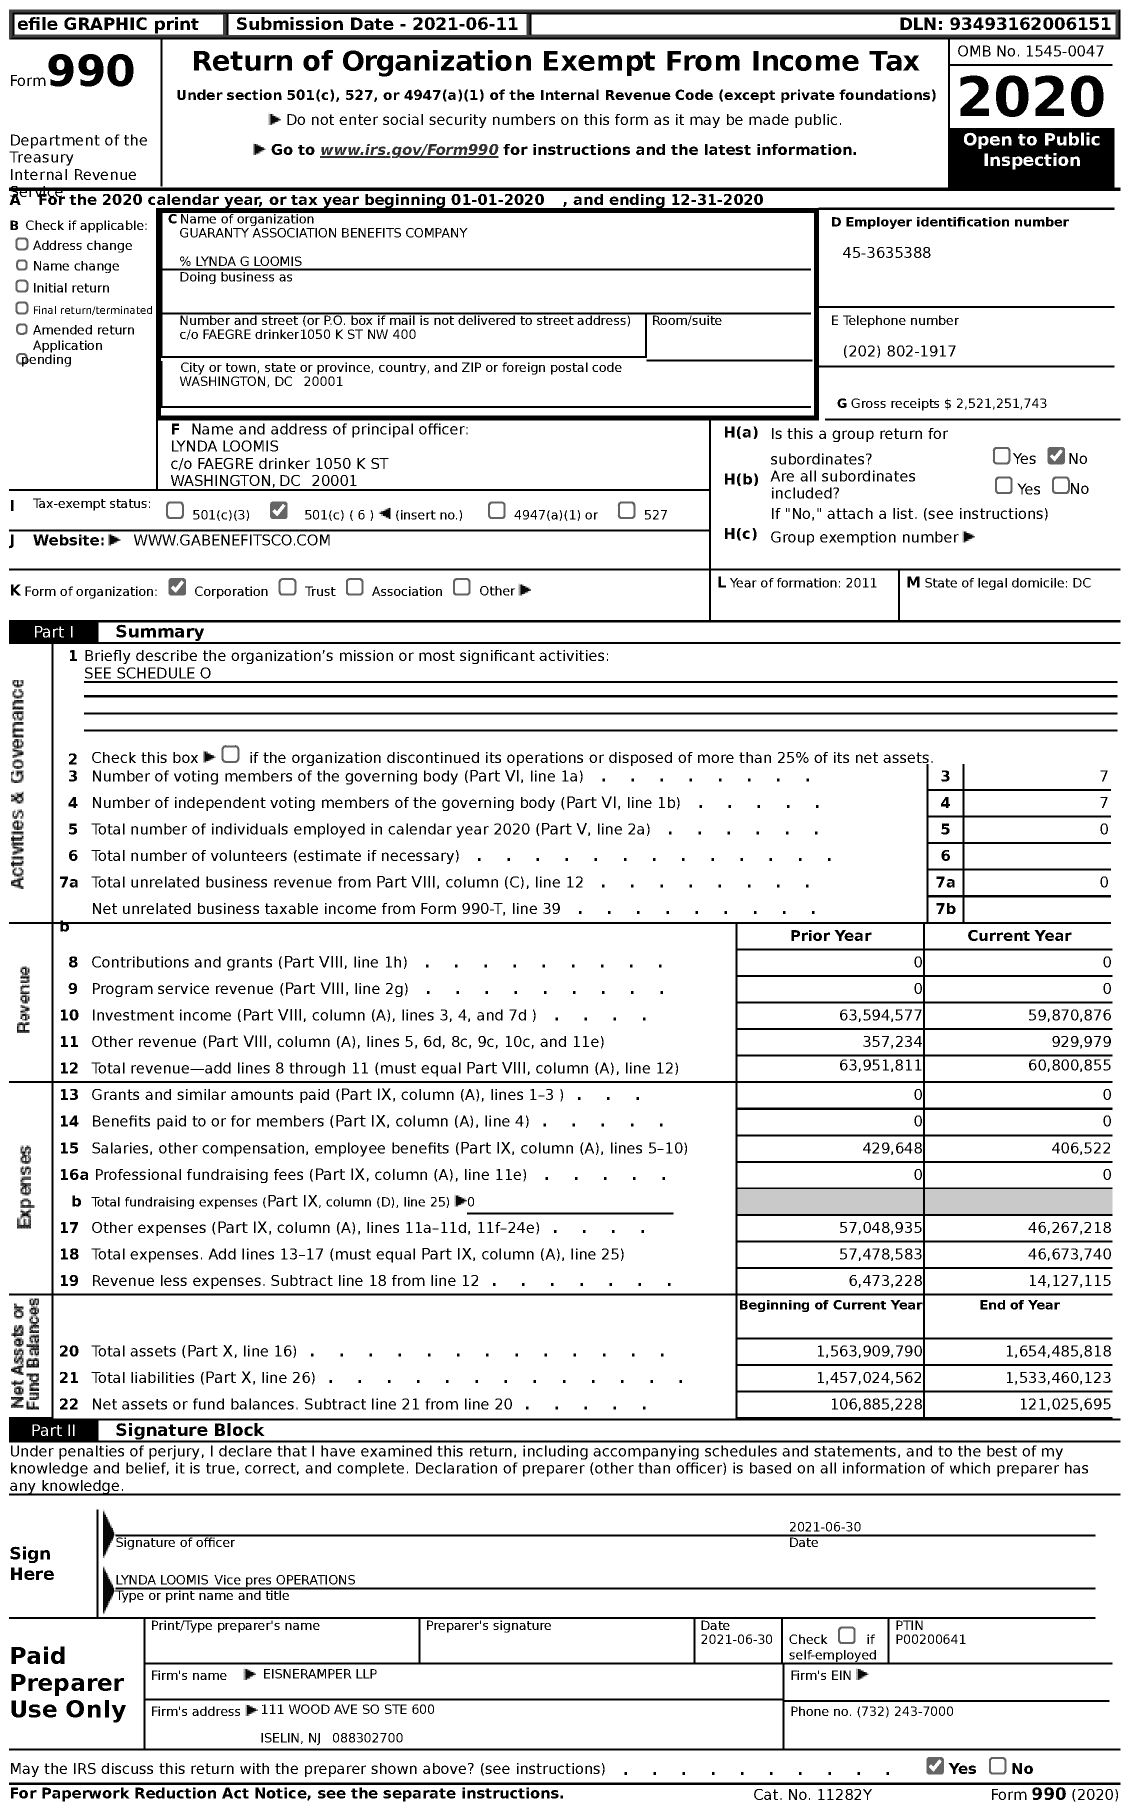 Image of first page of 2020 Form 990 for Guaranty Association Benefits Company (GABC)